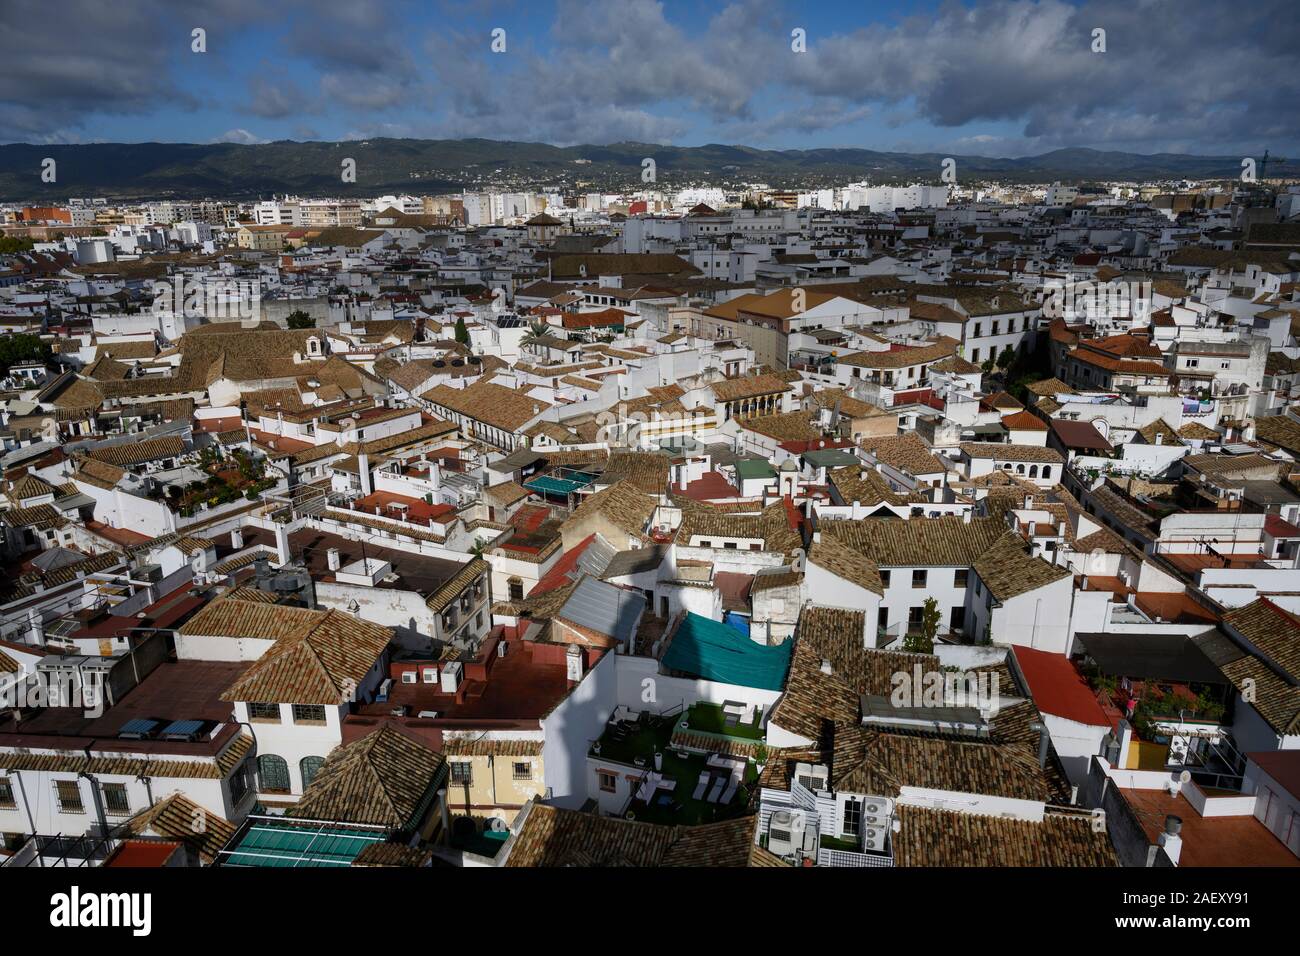 Aerial View of Houses in a town, Spain Stock Photo